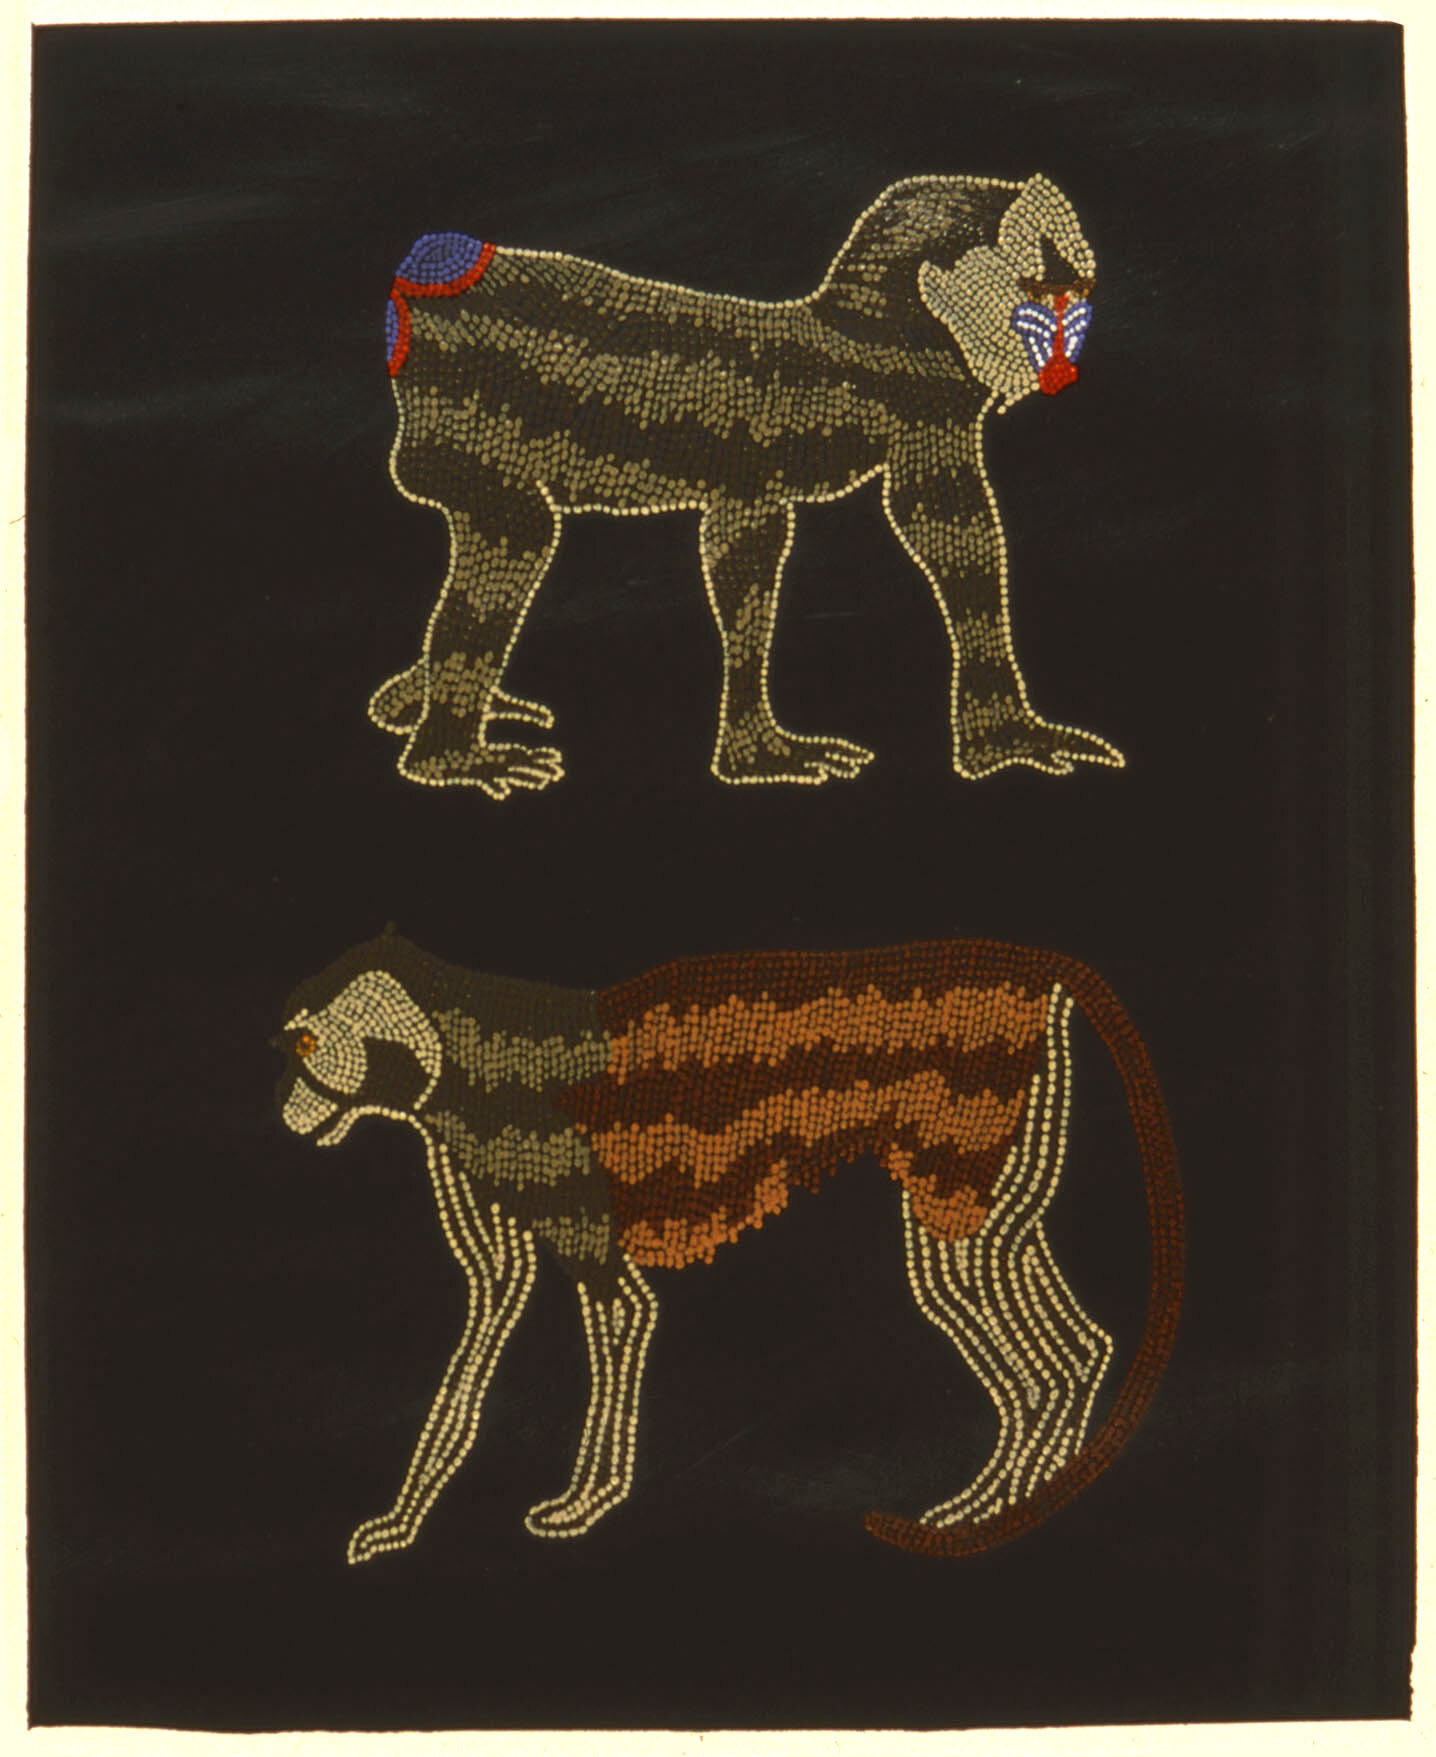   Mandrill Baboon &amp; Hussar Monkey , 1973, acrylic, paper, 14 x 17 inches.  Collection of Roger Clisby. 